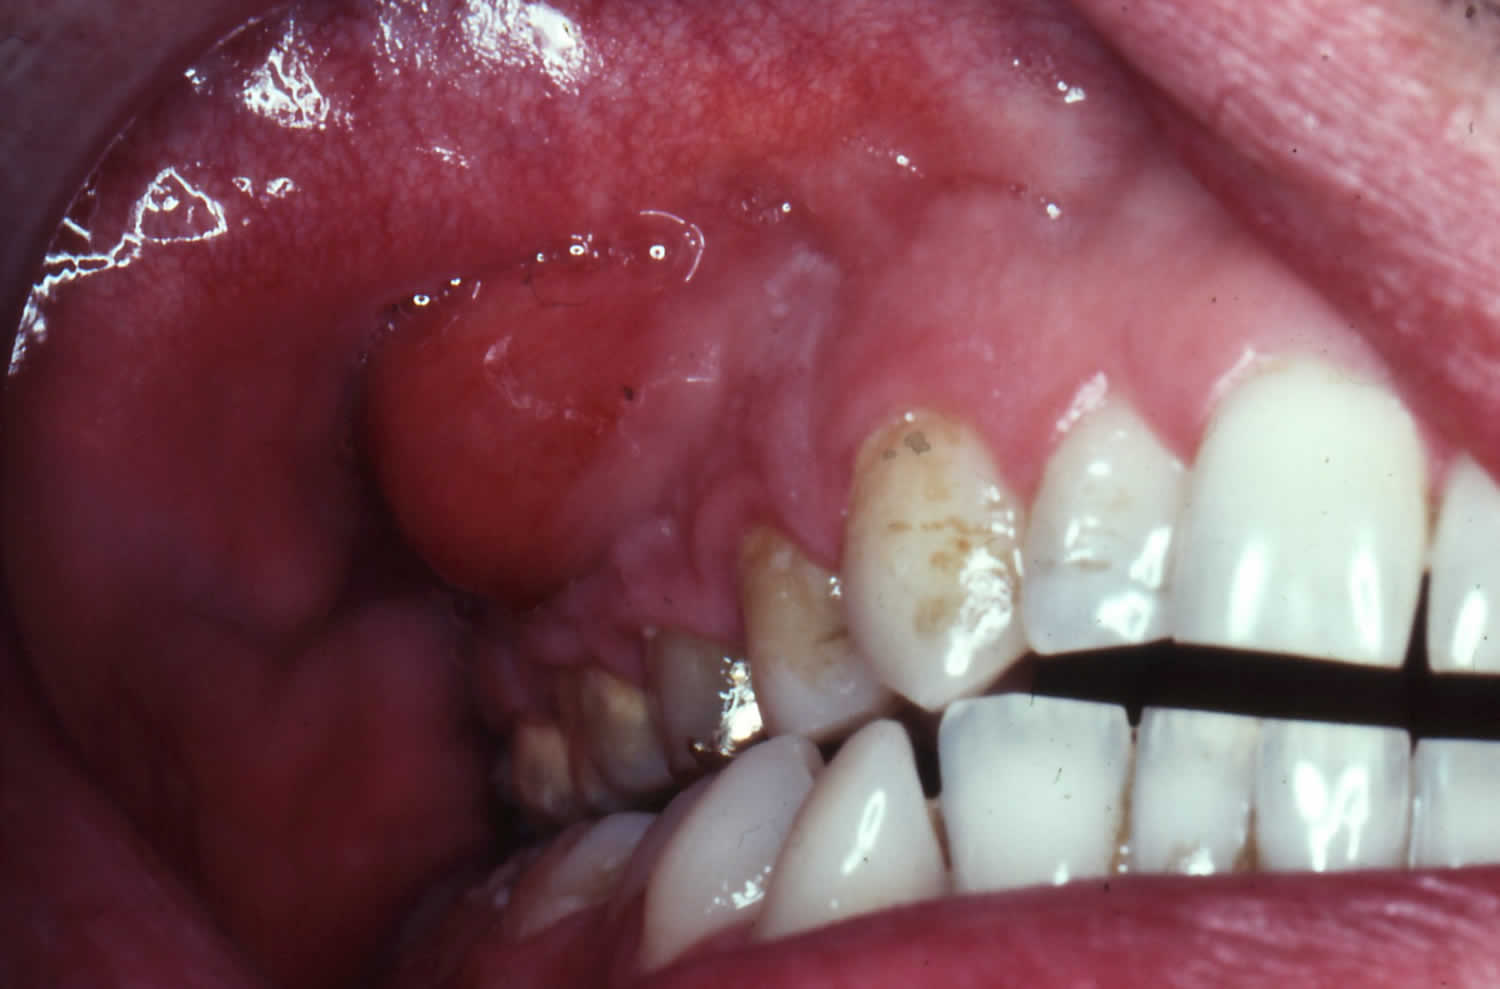 Gum Abscess All About Dental Abscesses Tooth Abscesses And Drainage ...